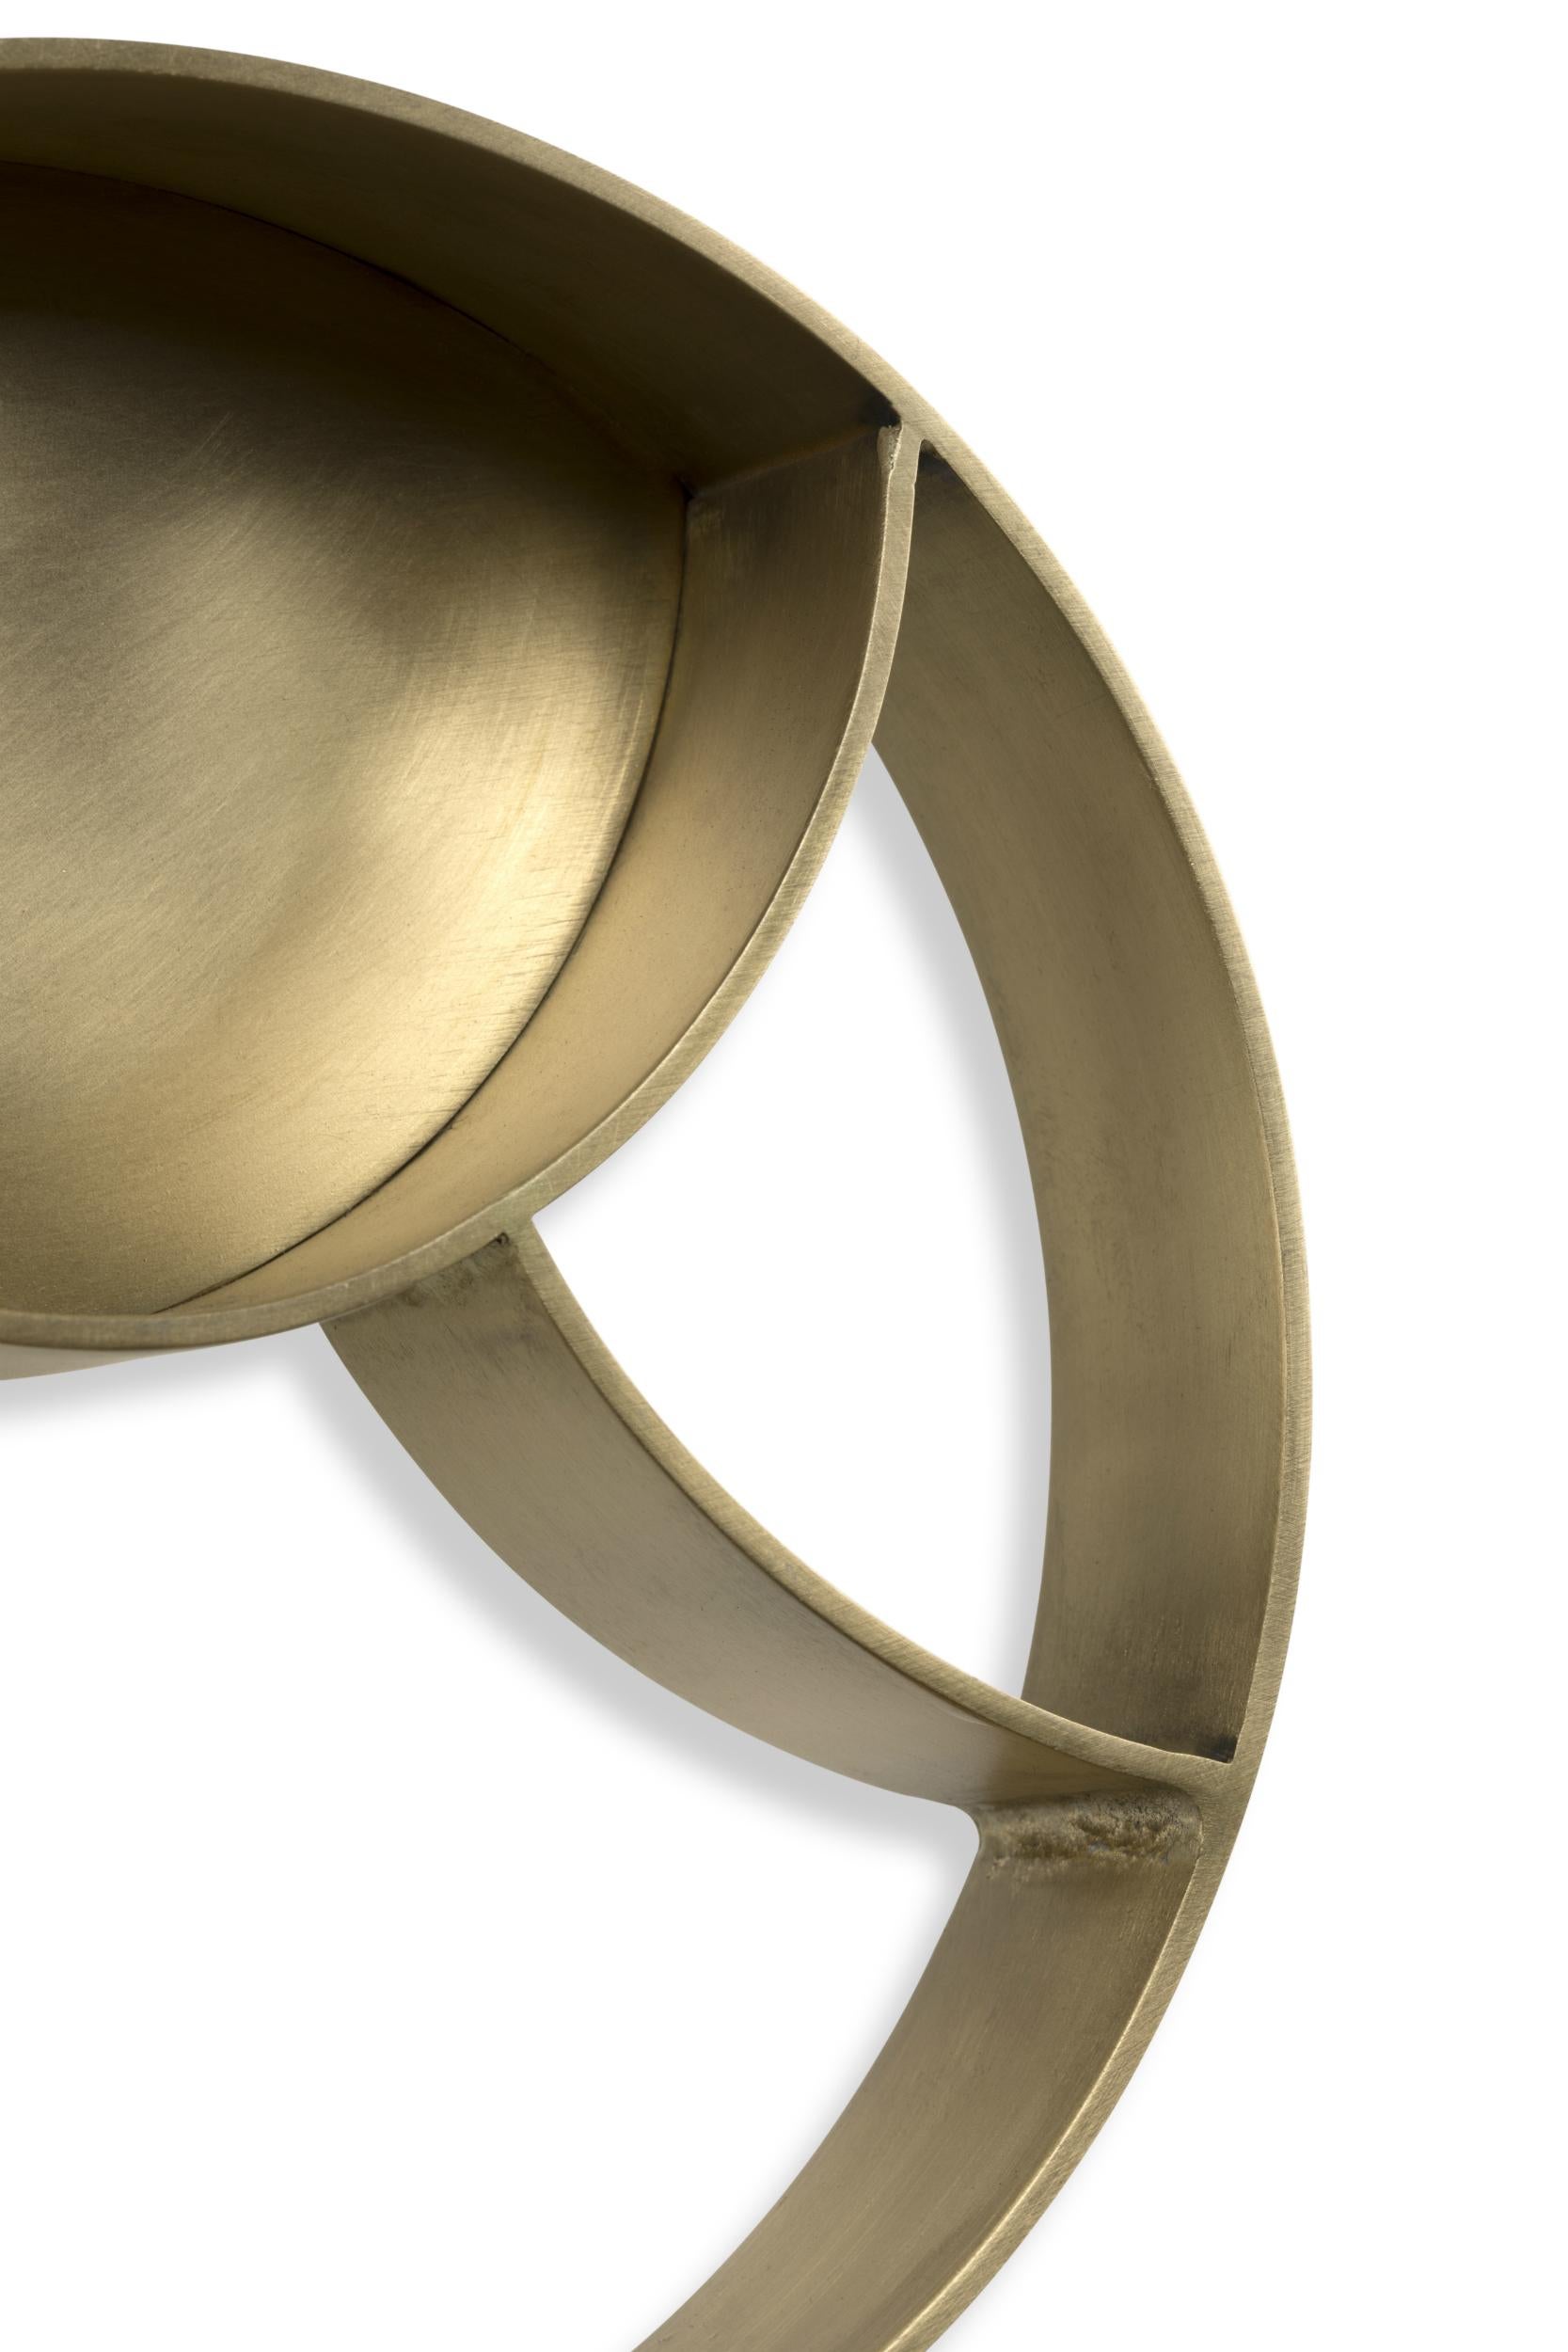 Koi Towel Ring in Aged Brushed Brass In New Condition For Sale In New York, NY